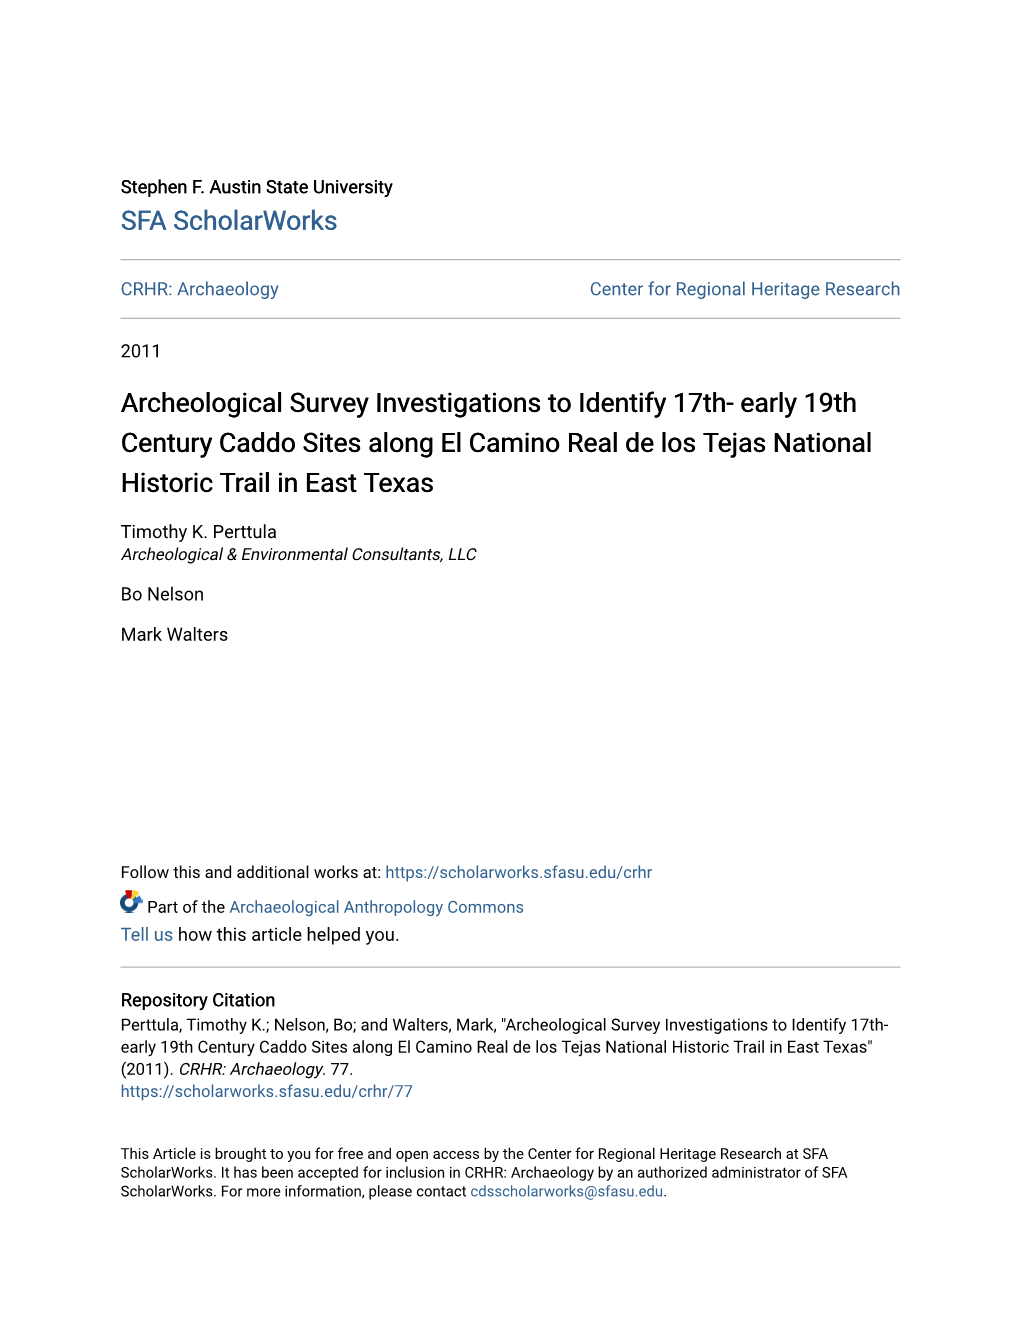 Archeological Survey Investigations to Identify 17Th- Early 19Th Century Caddo Sites Along El Camino Real De Los Tejas National Historic Trail in East Texas